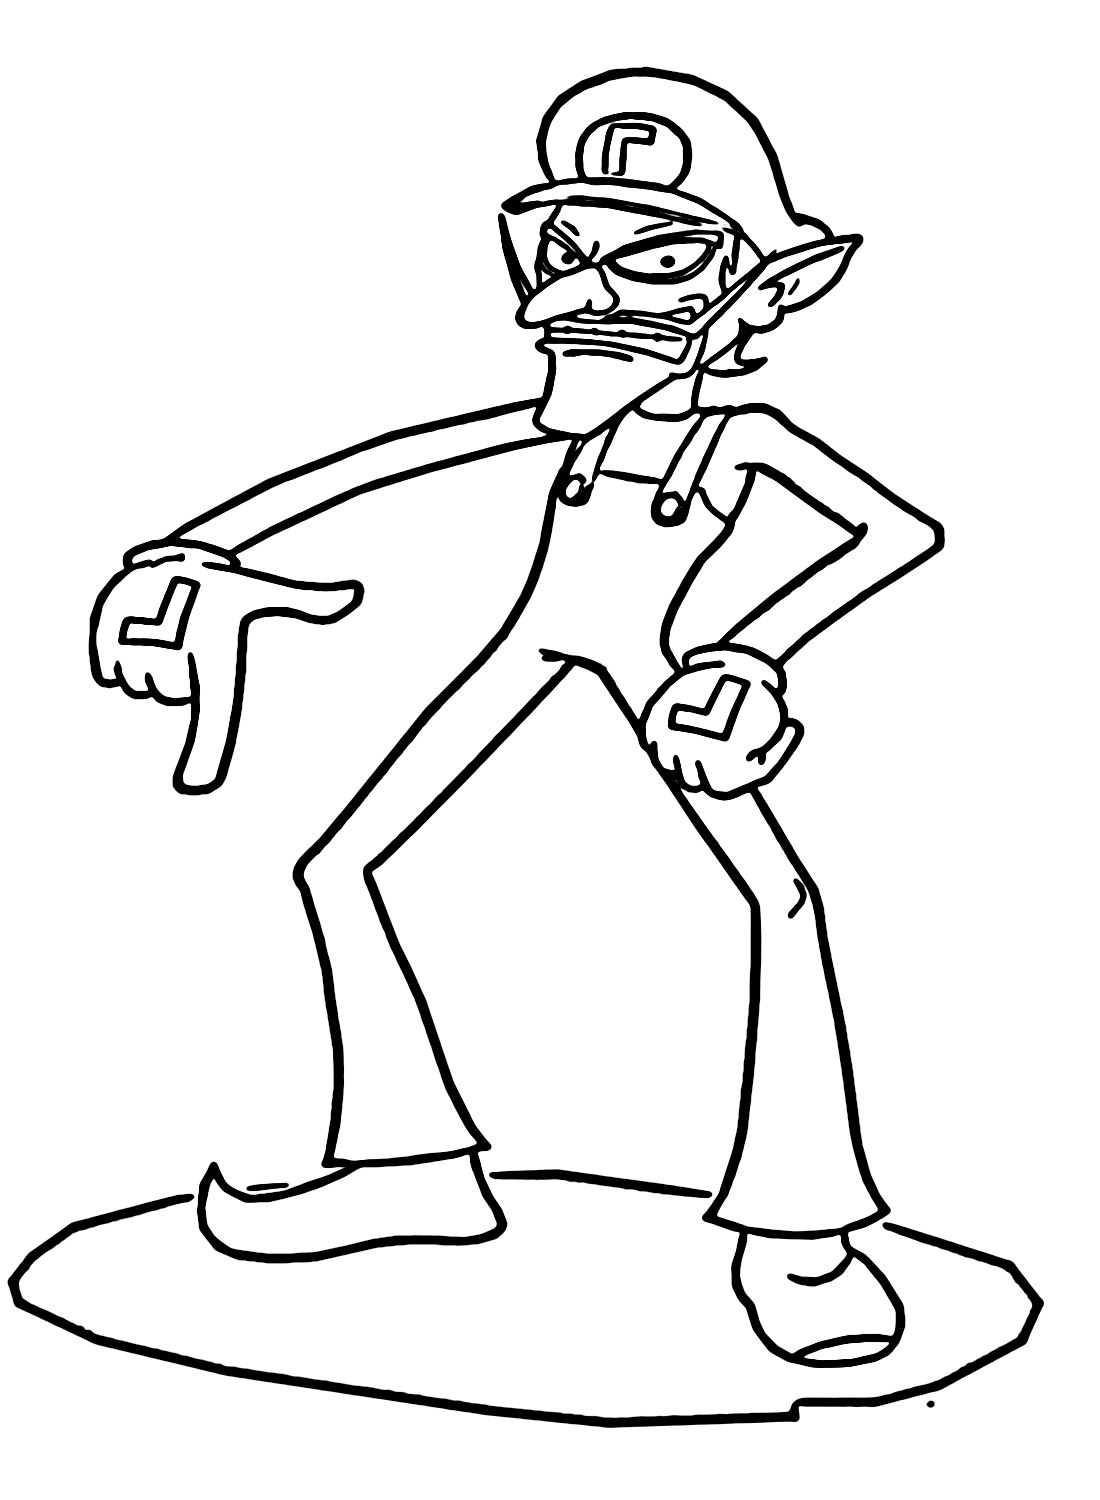 waluigi coloring pages